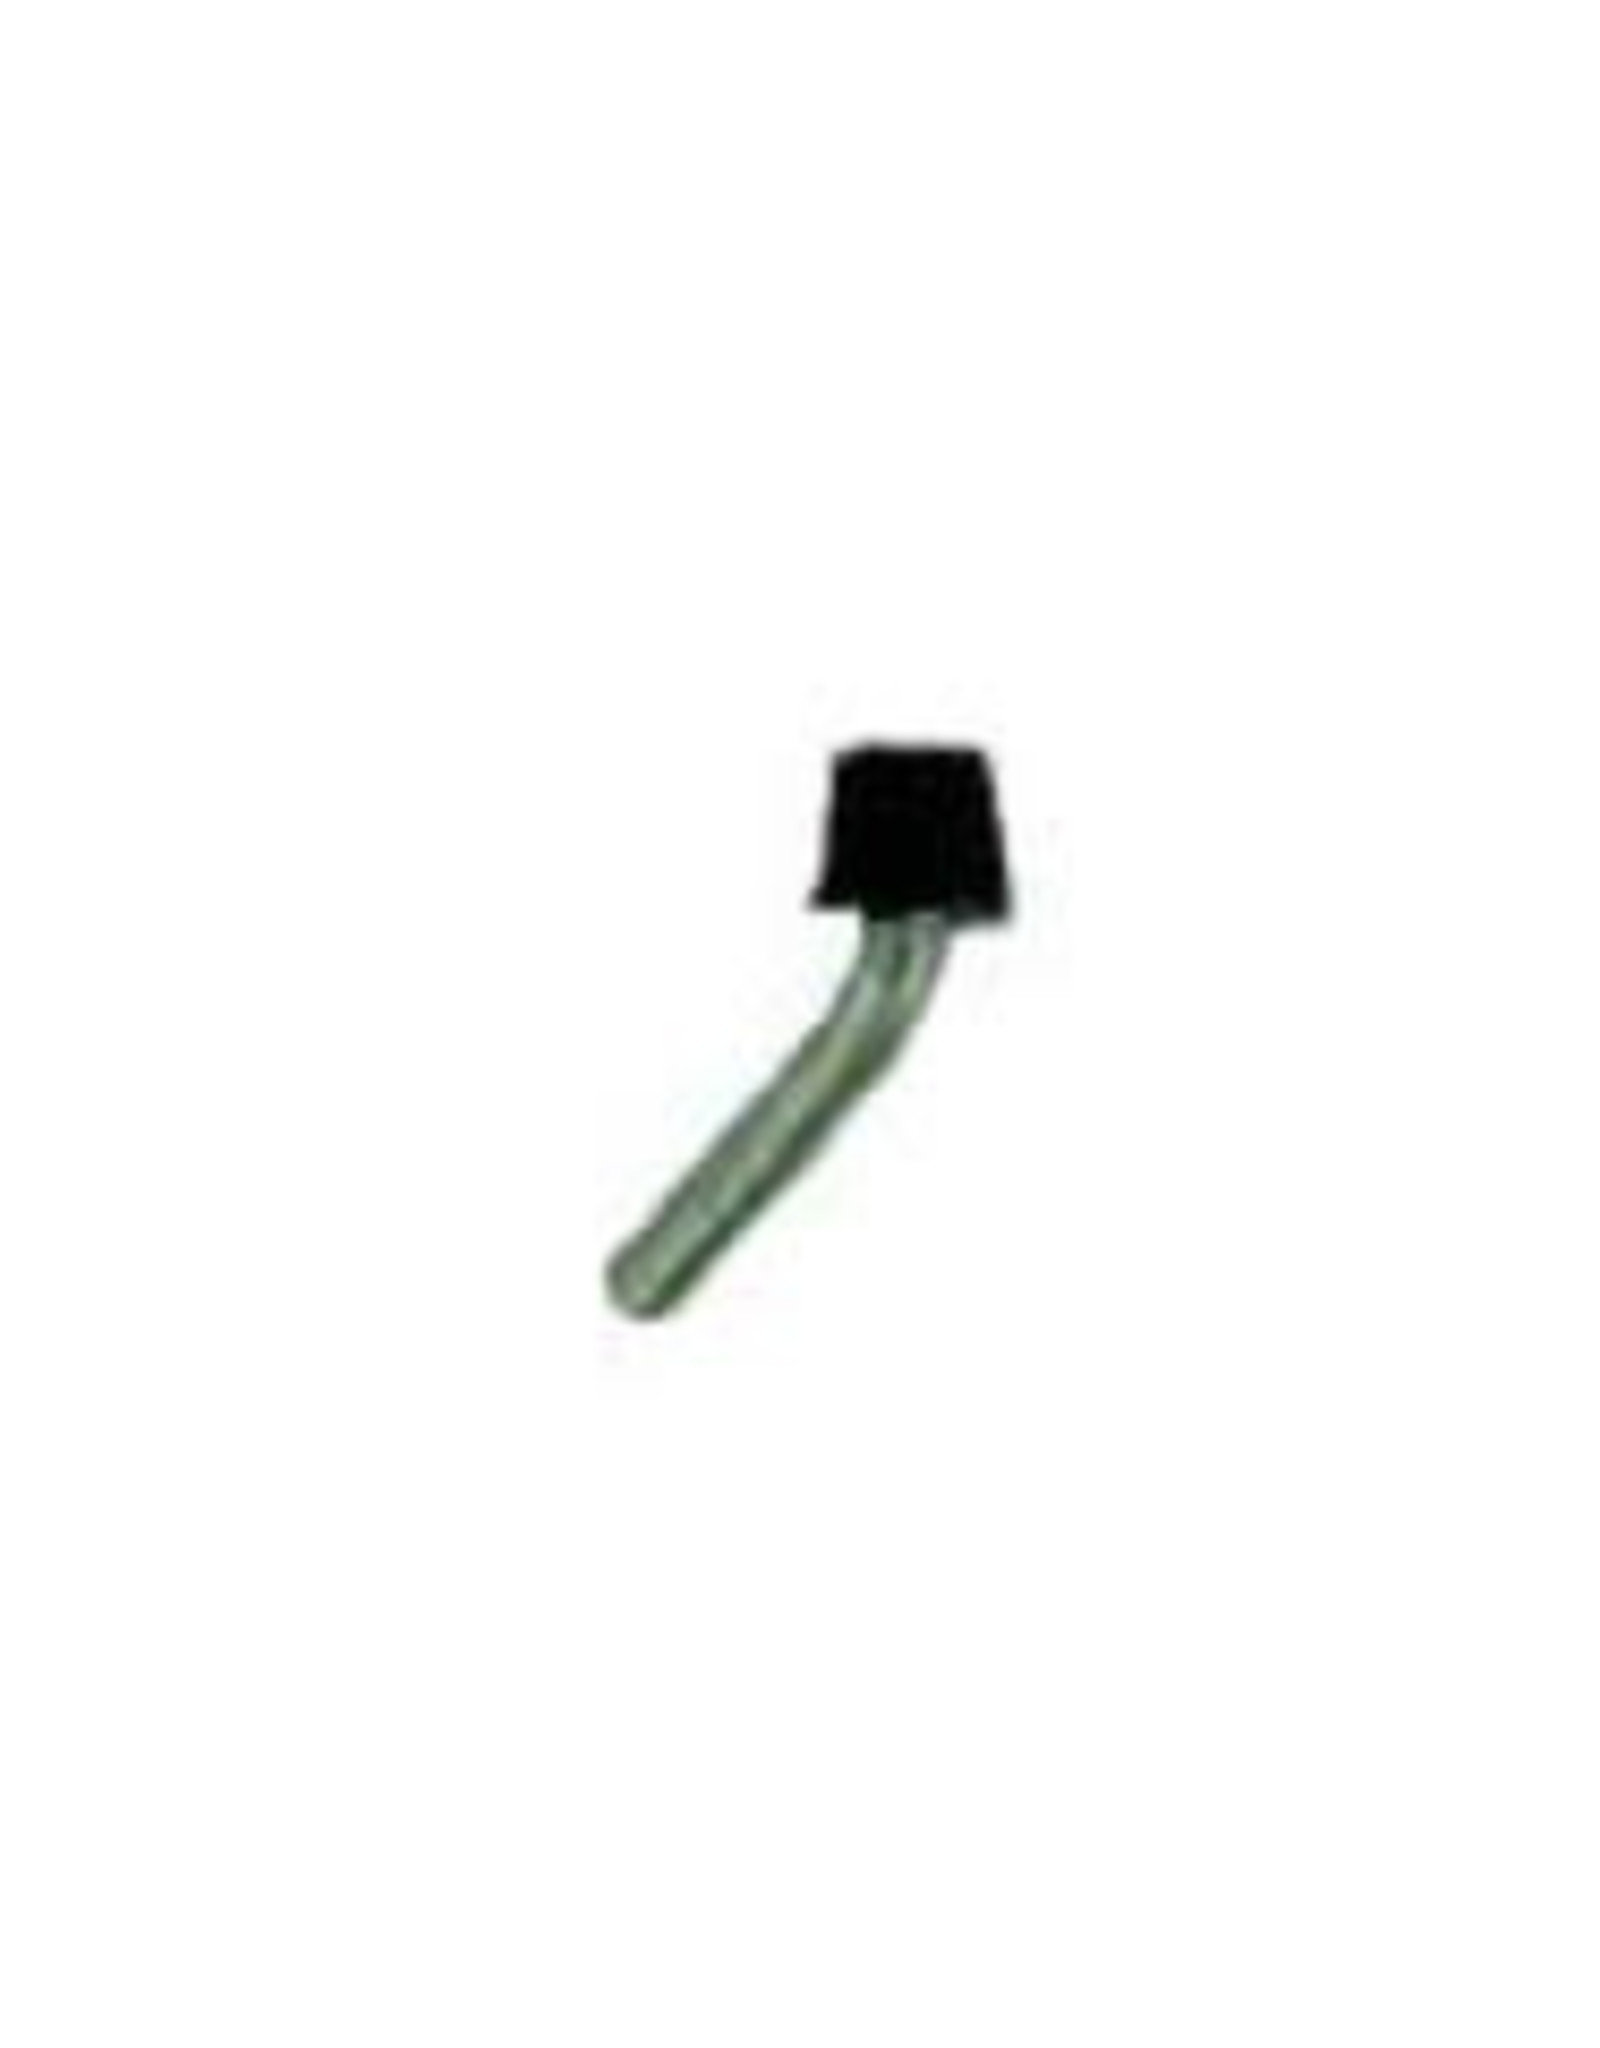 LIXIT ANIMAL CARE PRODUCTS LIXIT- REPLACEMENT TUBE AND STOPPER FOR 16 OZ BOTTLE- MEDIUM